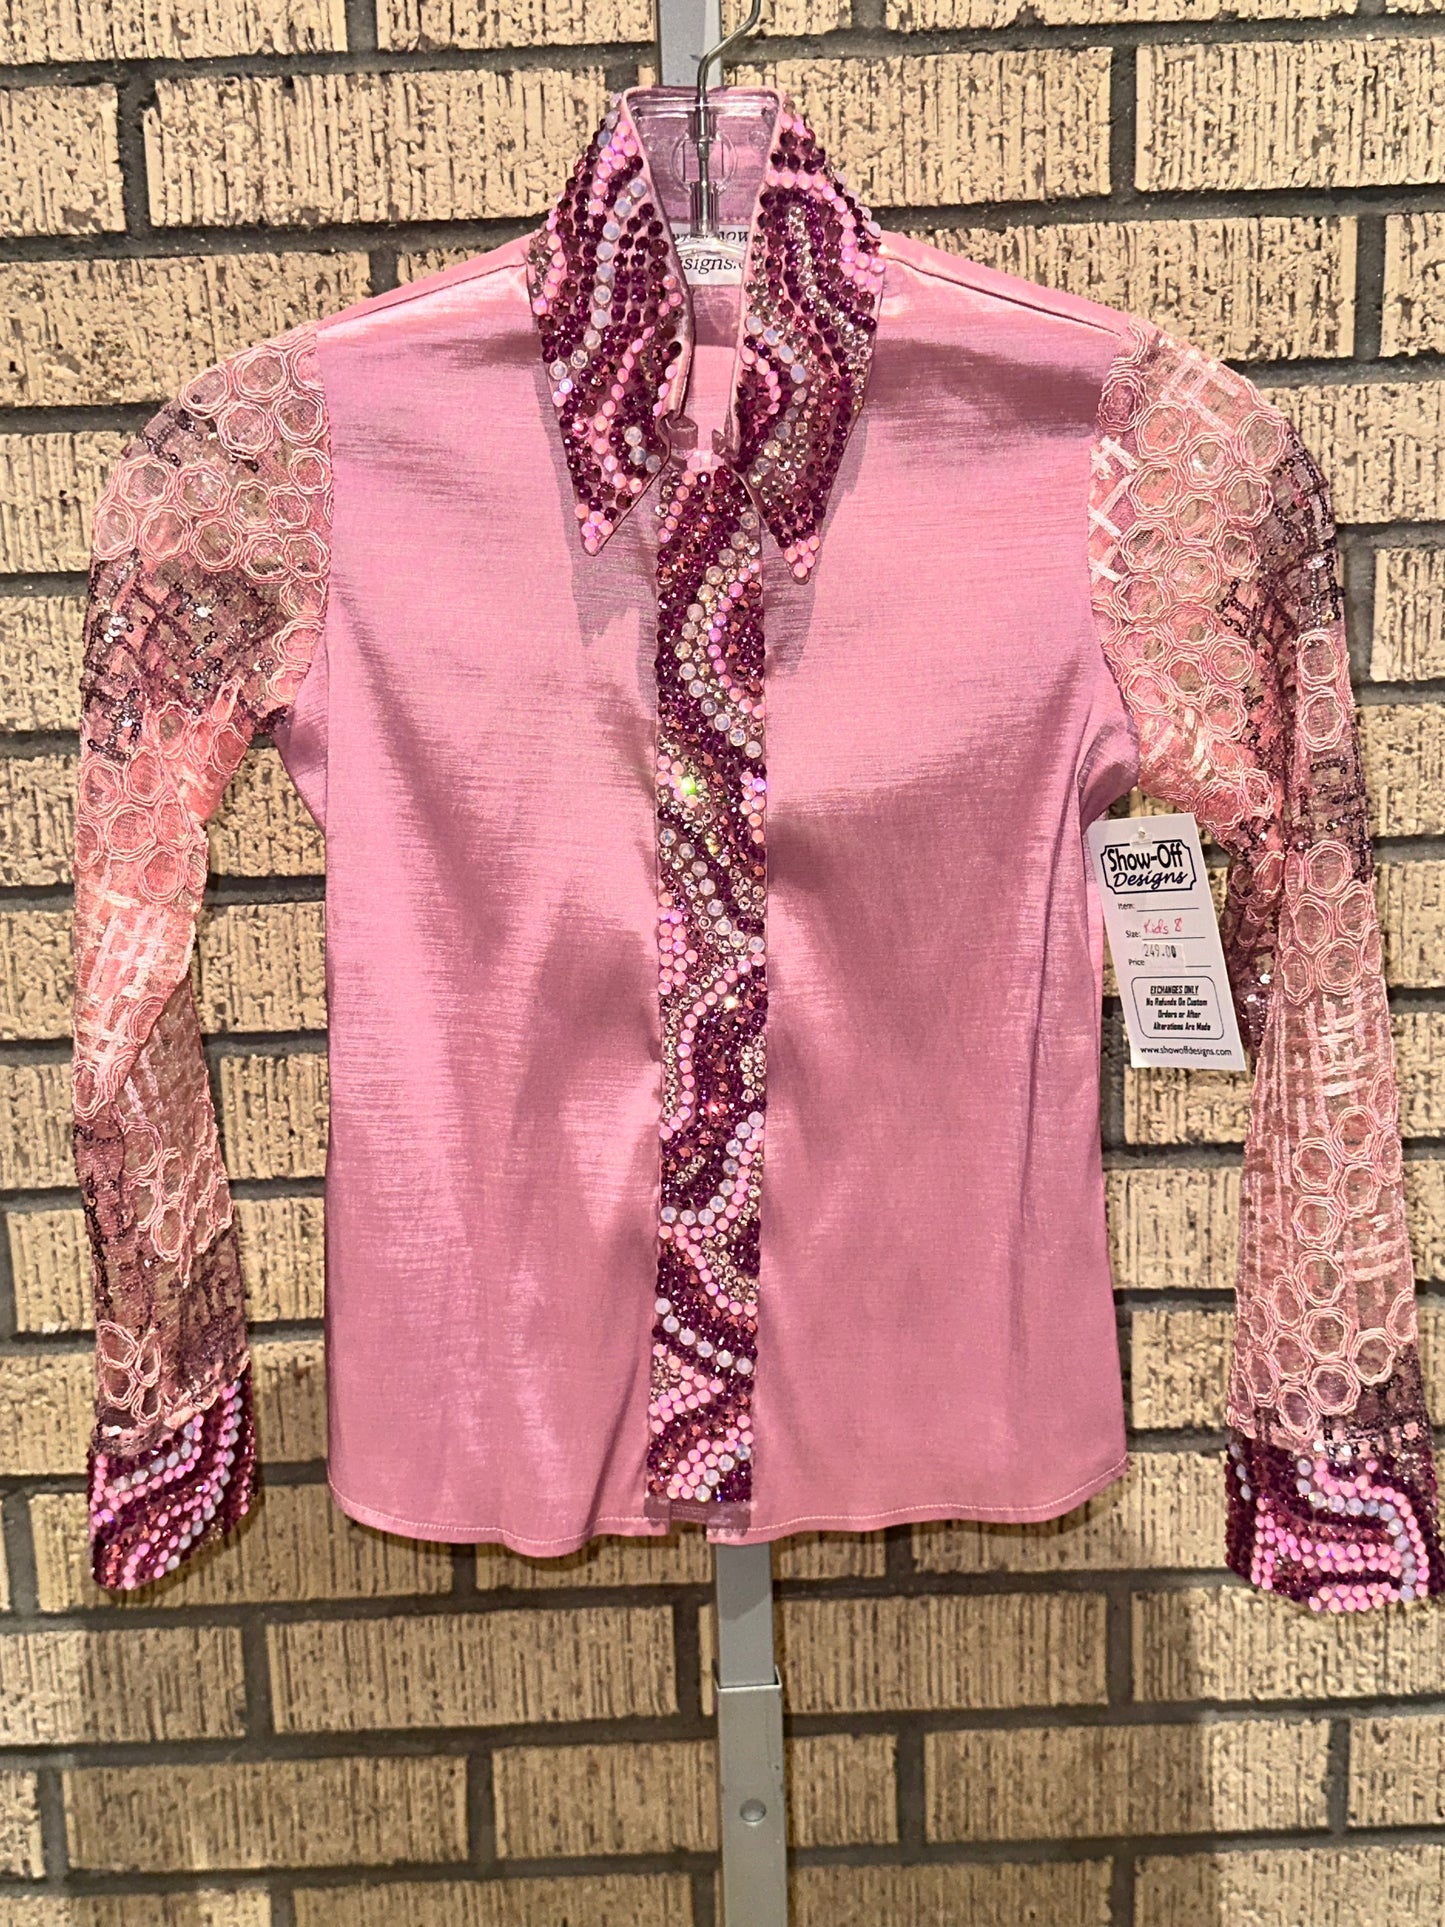 Kids 8 light pink stretch day shirt with raspberry and pink design